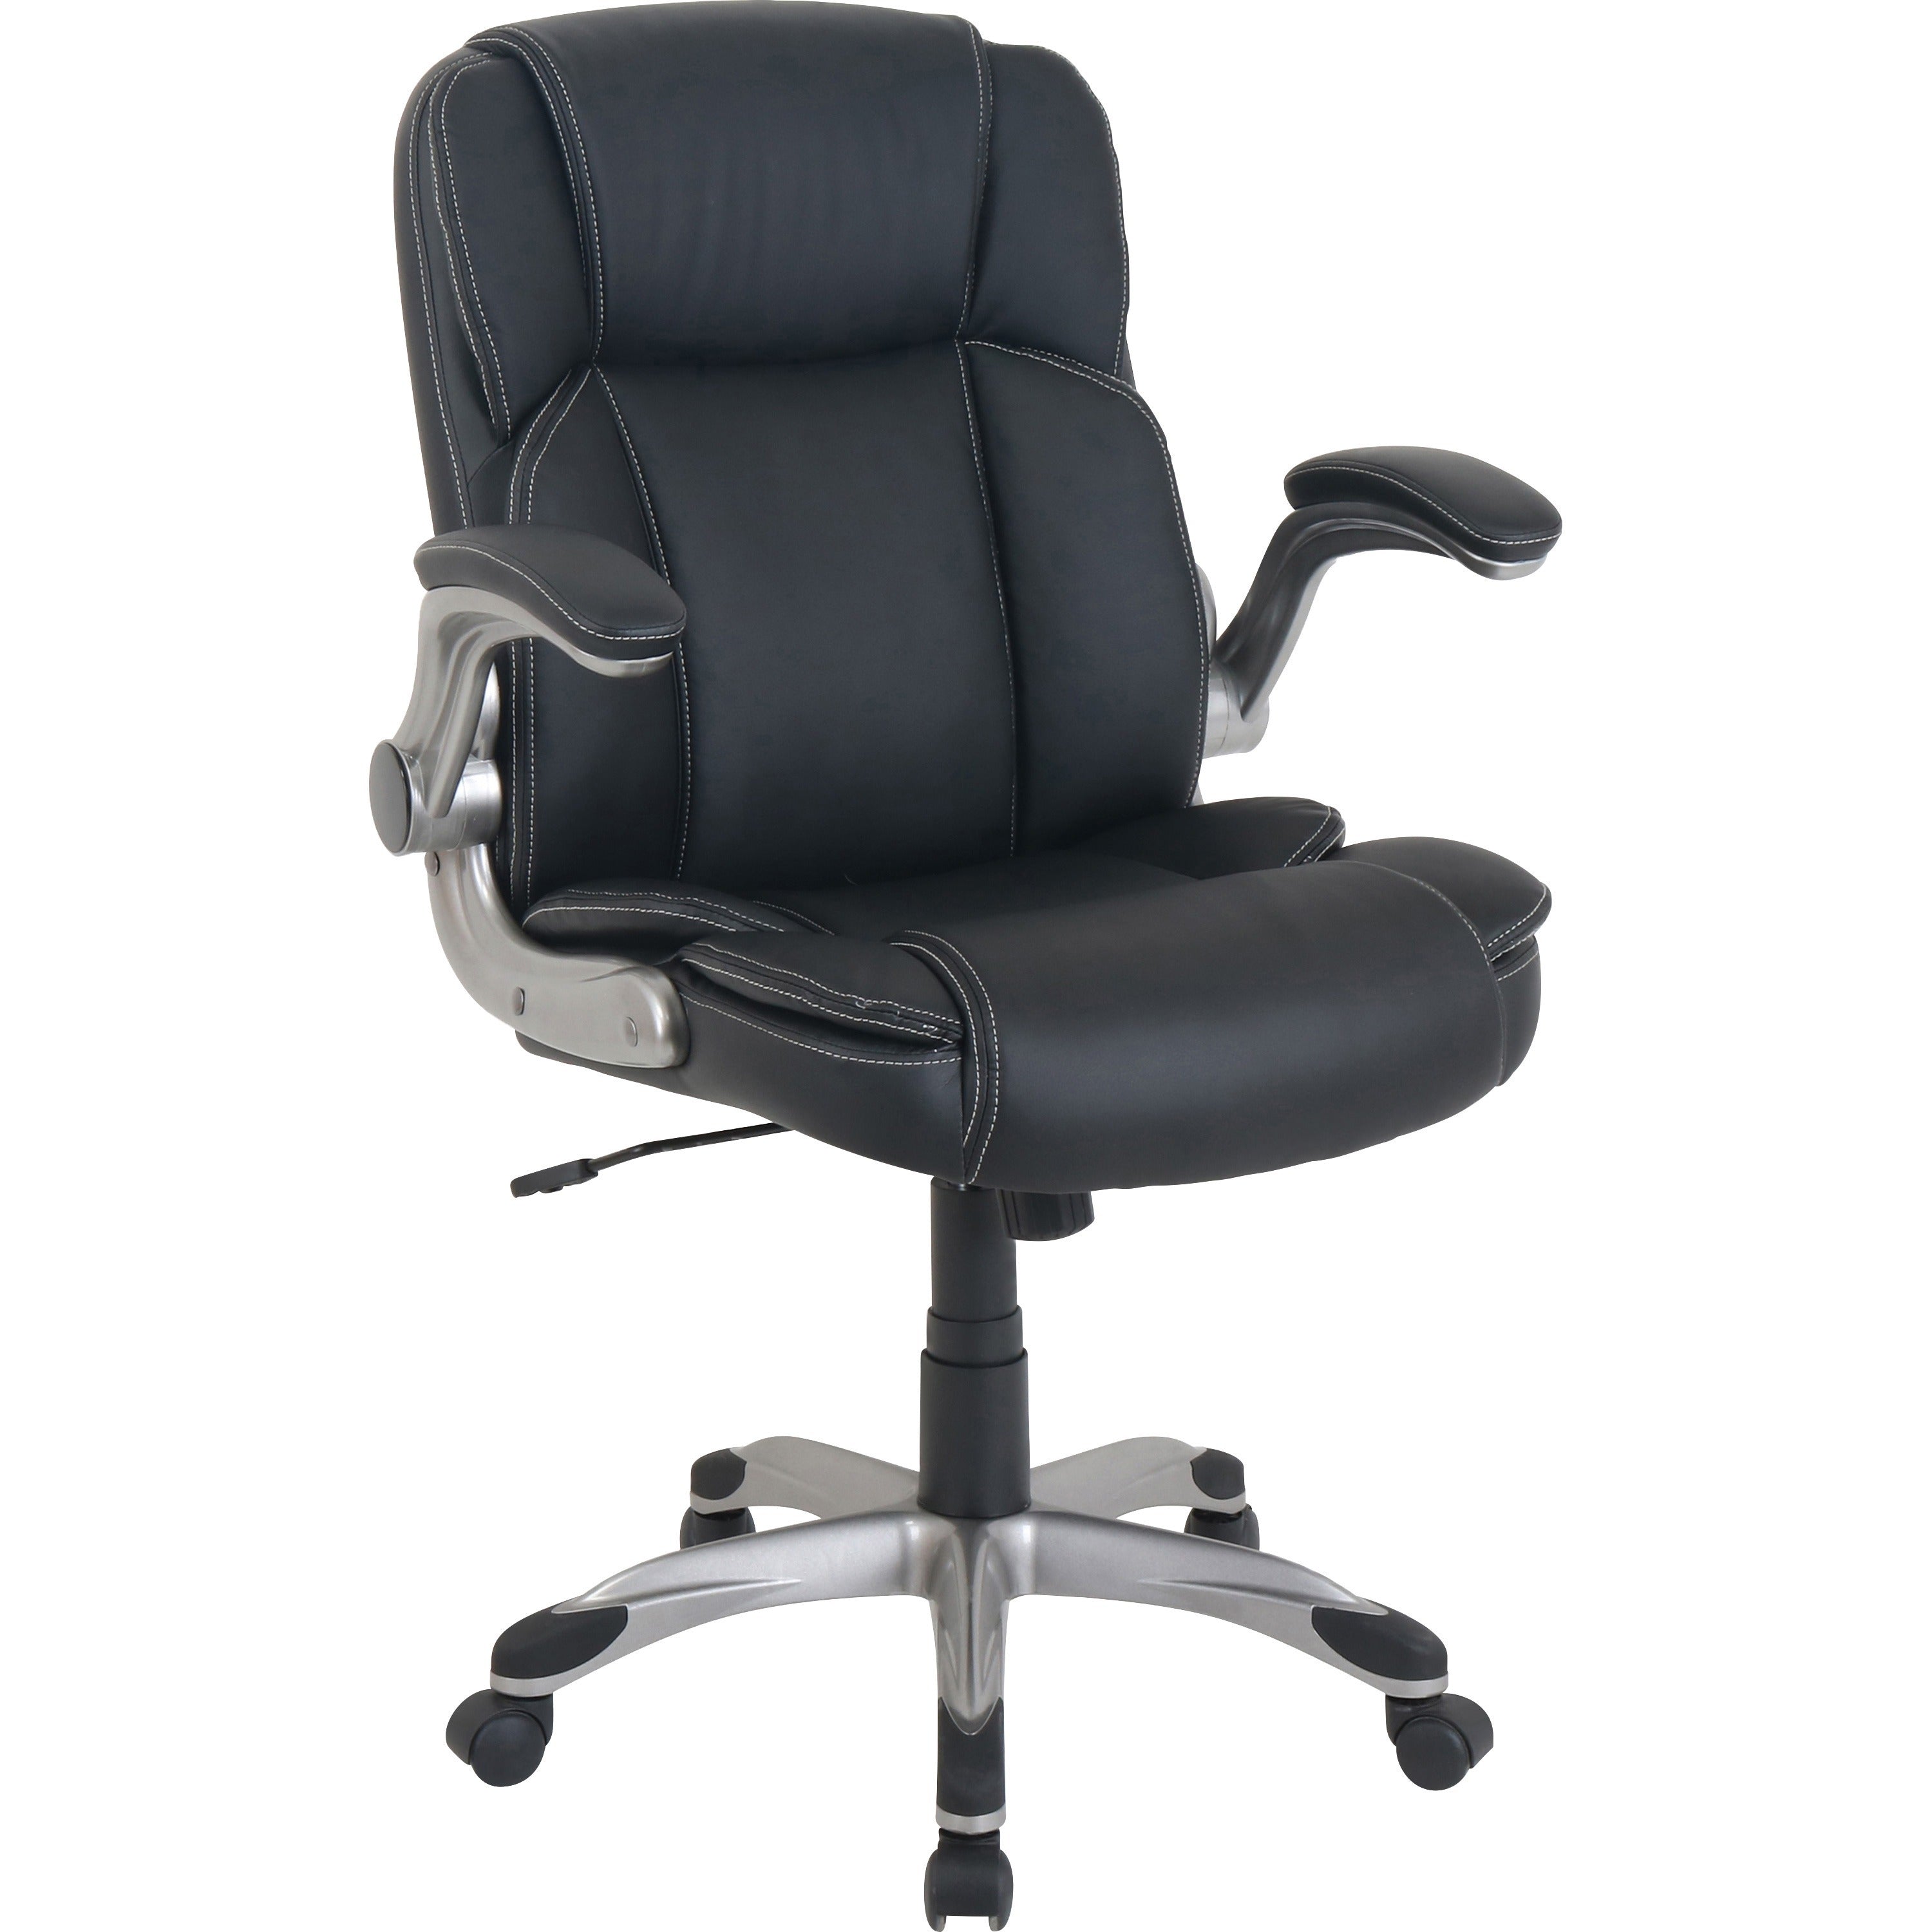 NuSparc Leather Rolling Chair - Mid Back - 5-star Base - Black - Bonded Leather - Armrest - 1 Each - 1